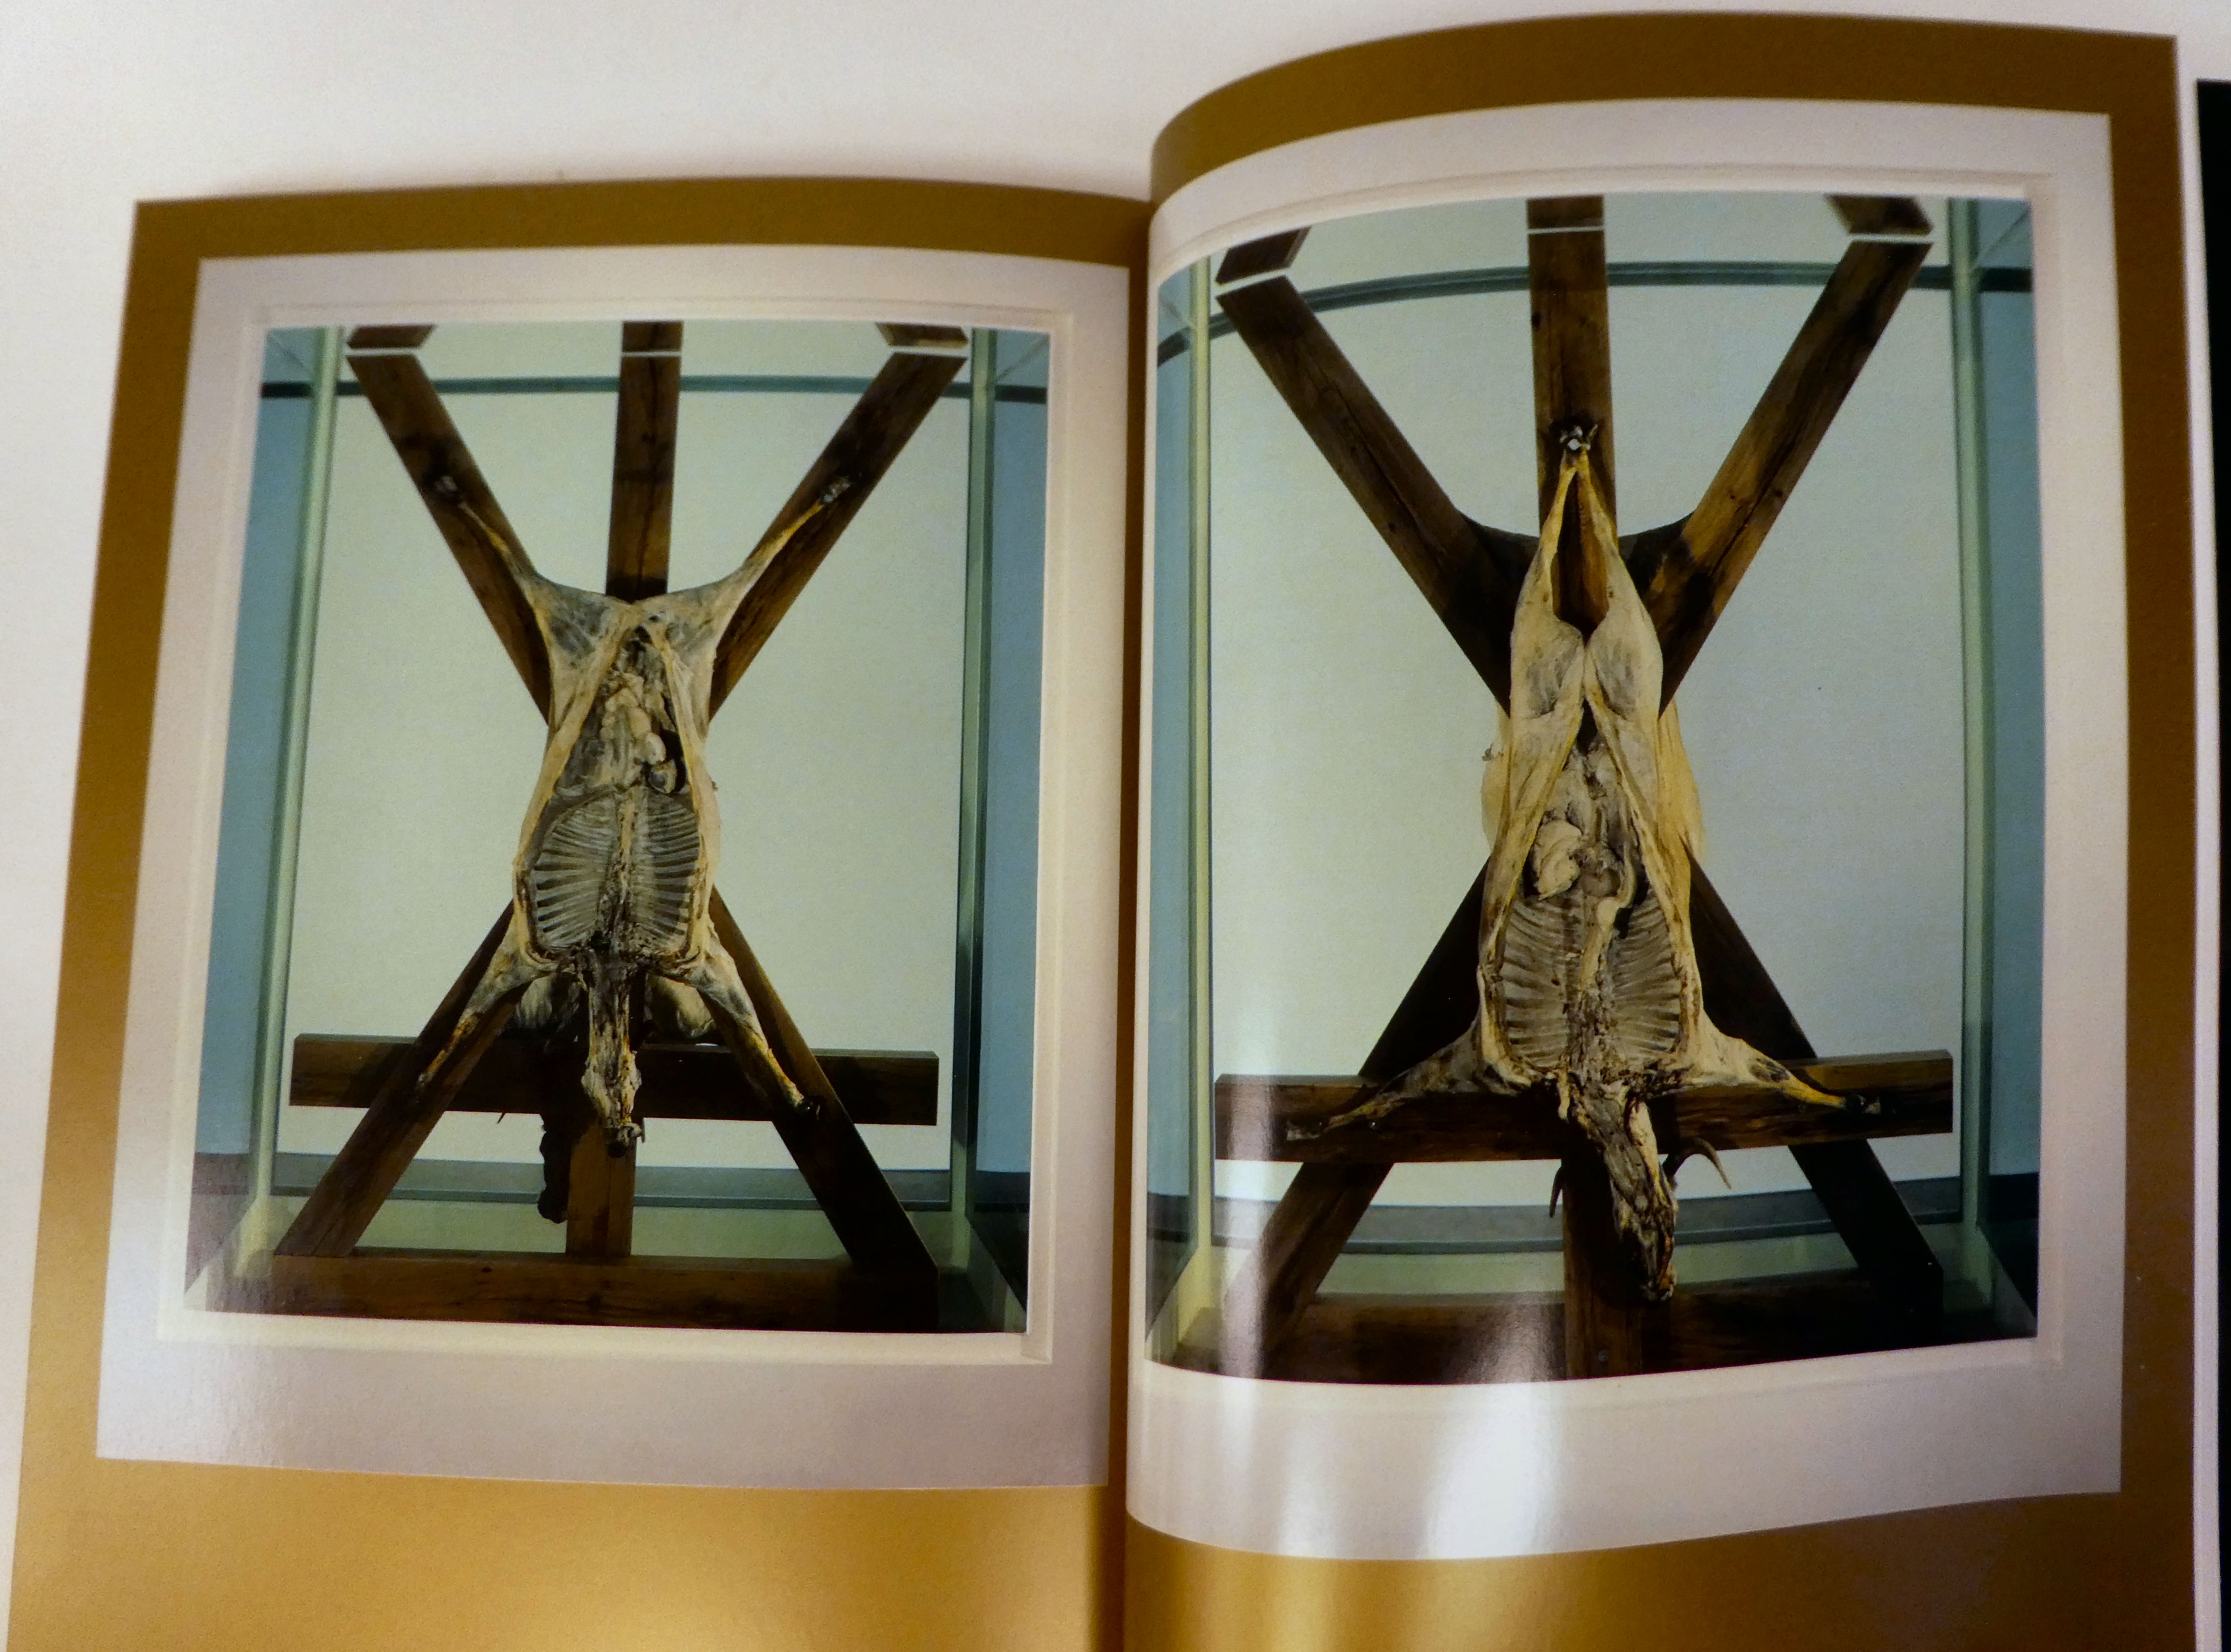 Book: 'The Death of God' a 2005 Brazilian exhibition catalogue of work by Damien Hirst, featuring - Image 5 of 6